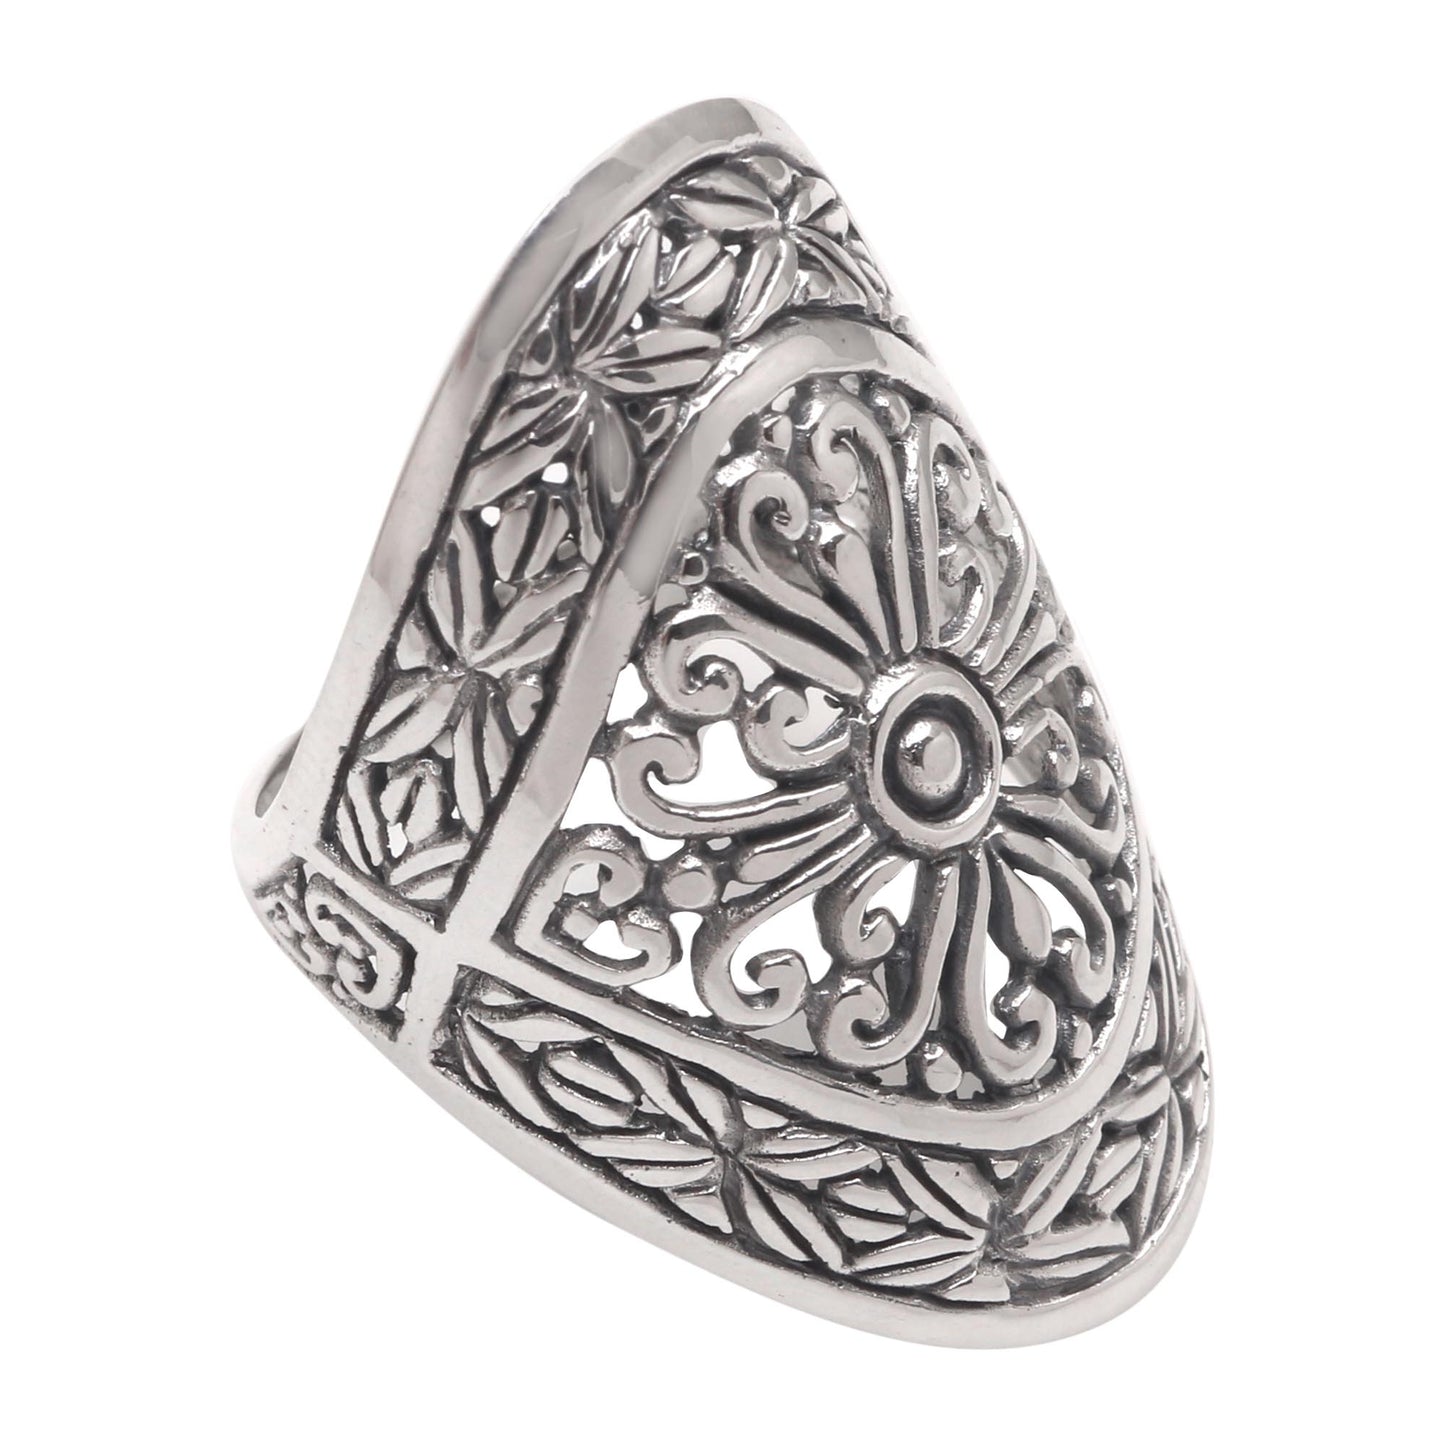 Bamboo Elegance Bamboo Leaf Sterling Silver Cocktail Ring from Bali